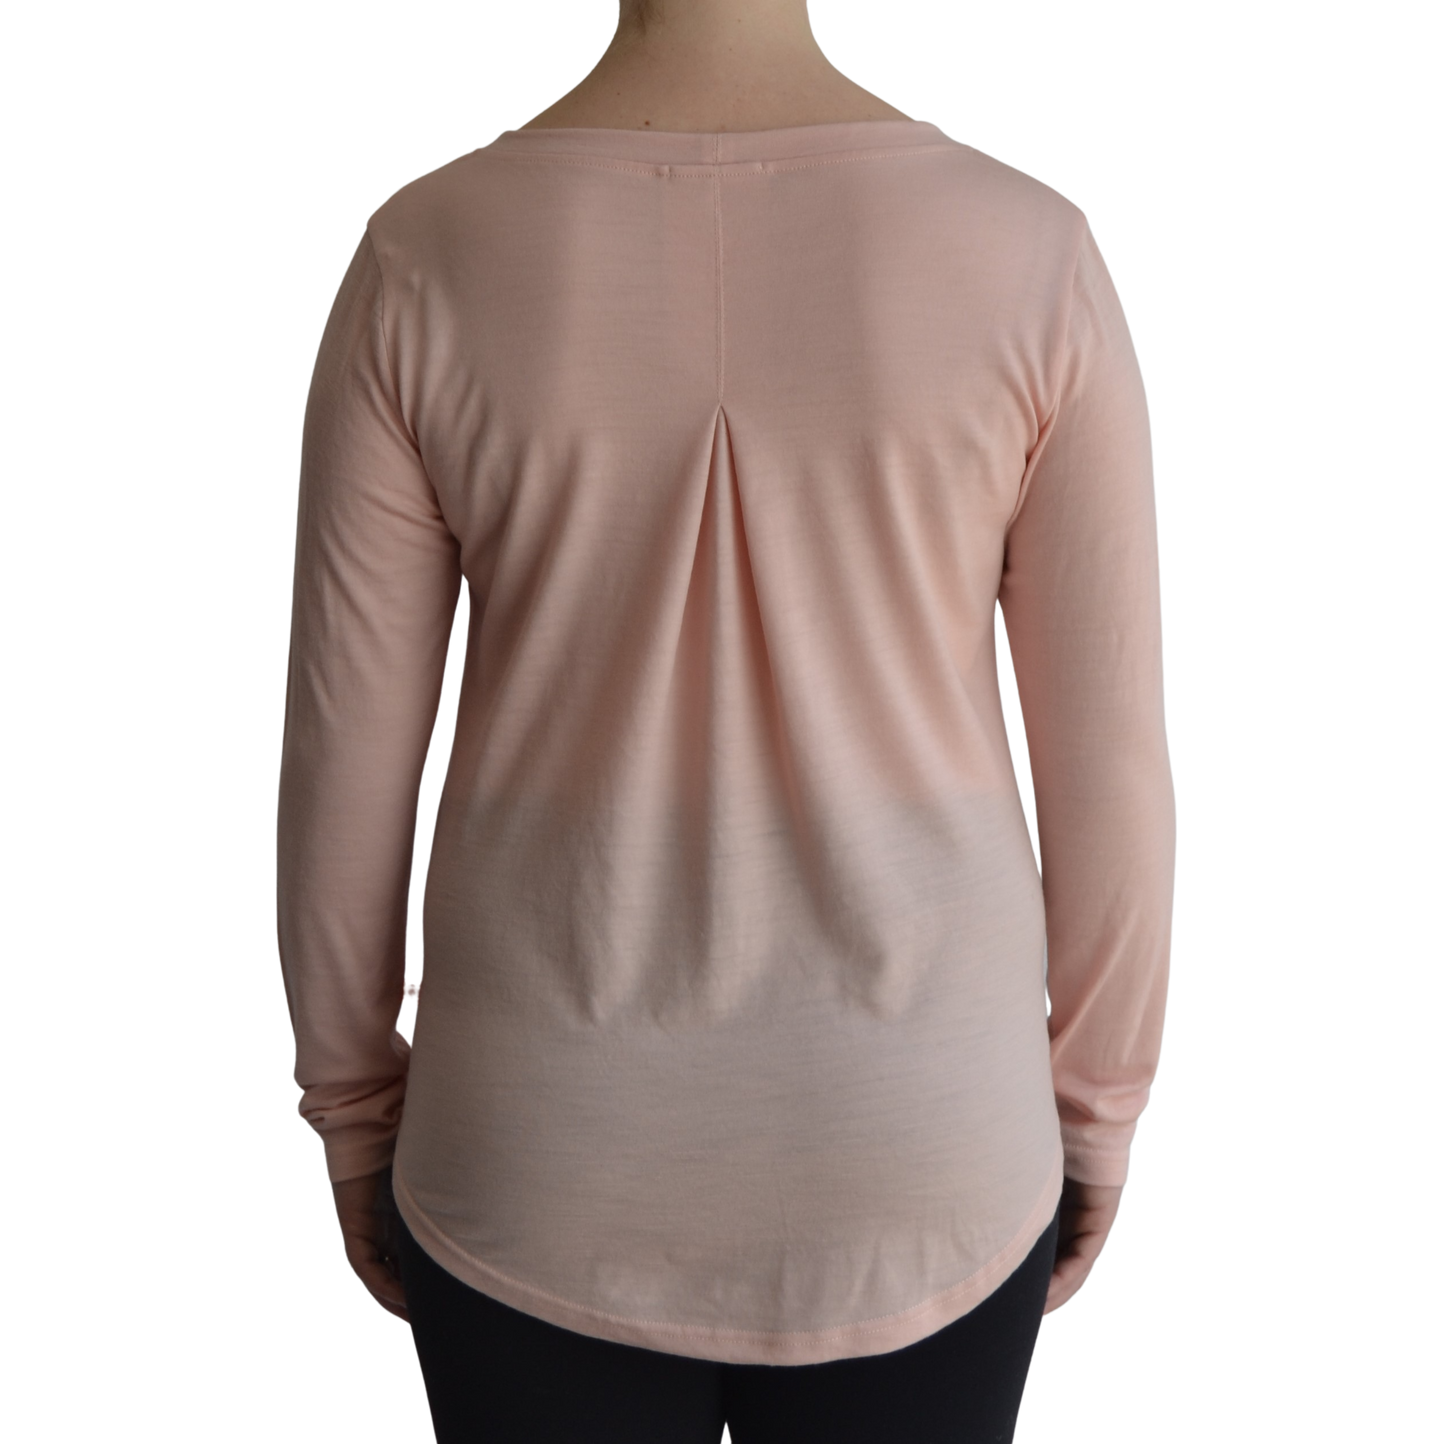 Links long sleeve merino top in petal light pink colour, model faces away so the back is showing front on with a box pleat and scooped hemline. 